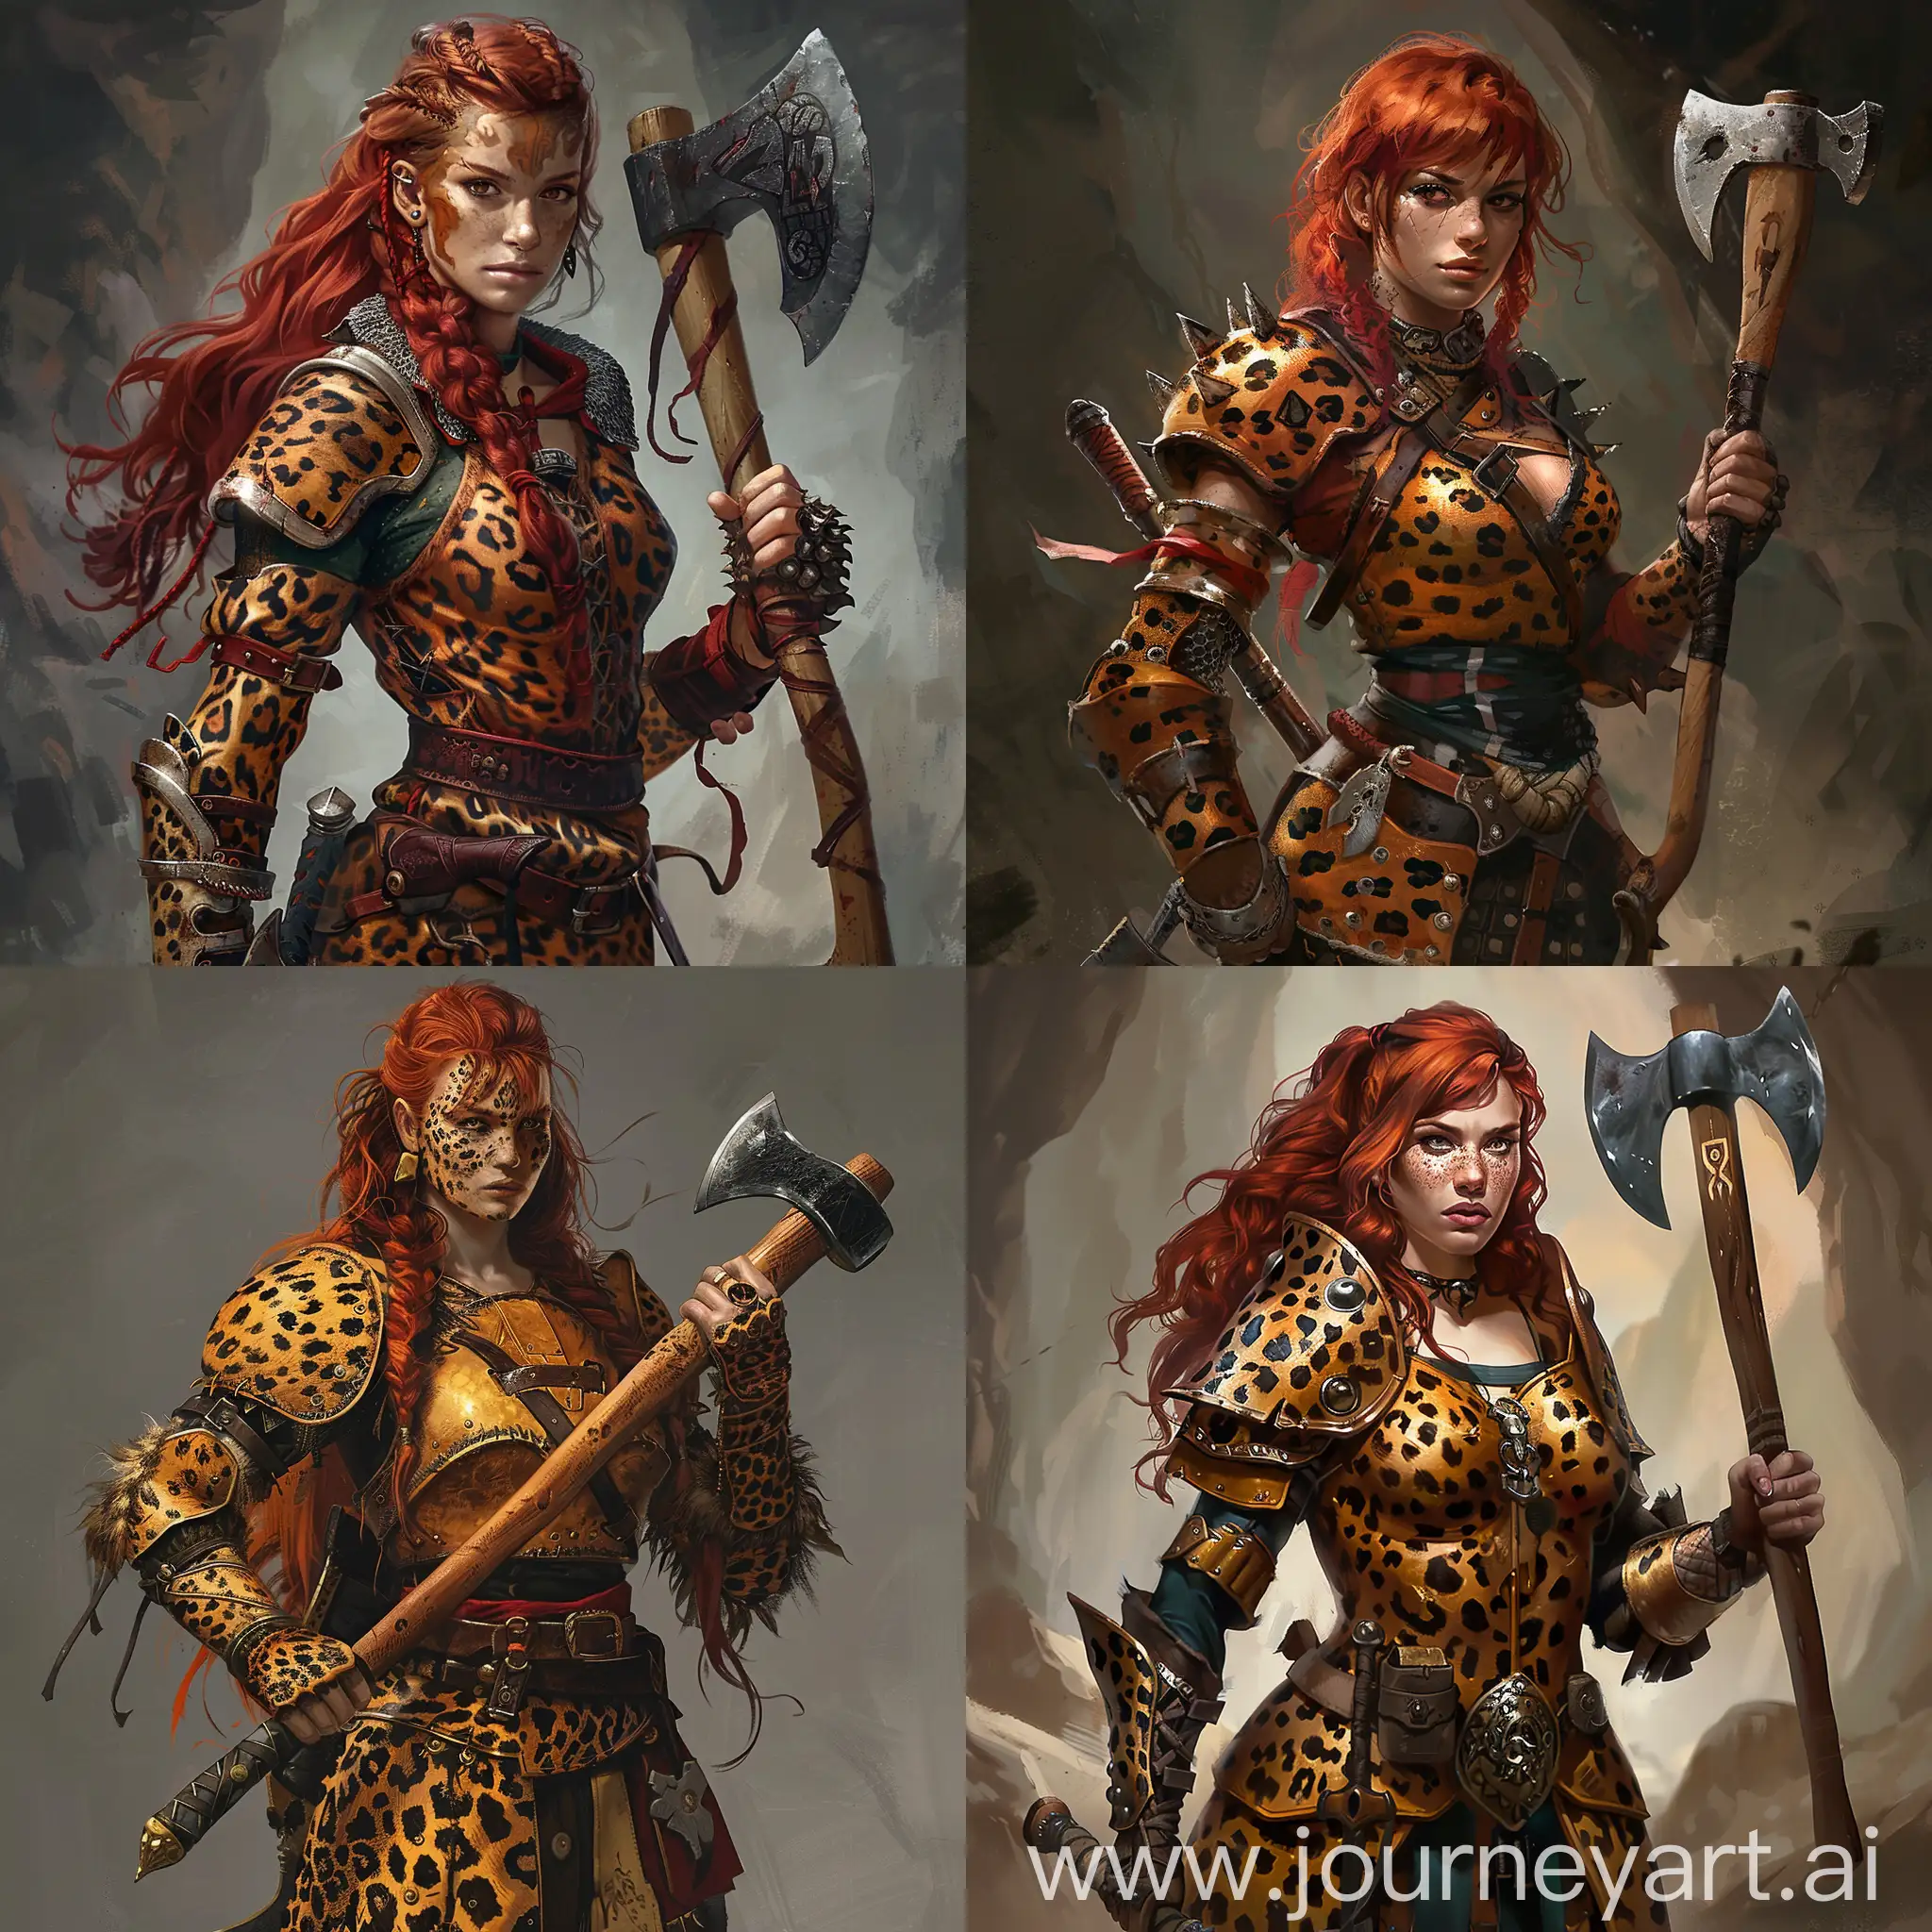 A red-haired warrior in sturdy leopard armor, holding a axe in her right hand